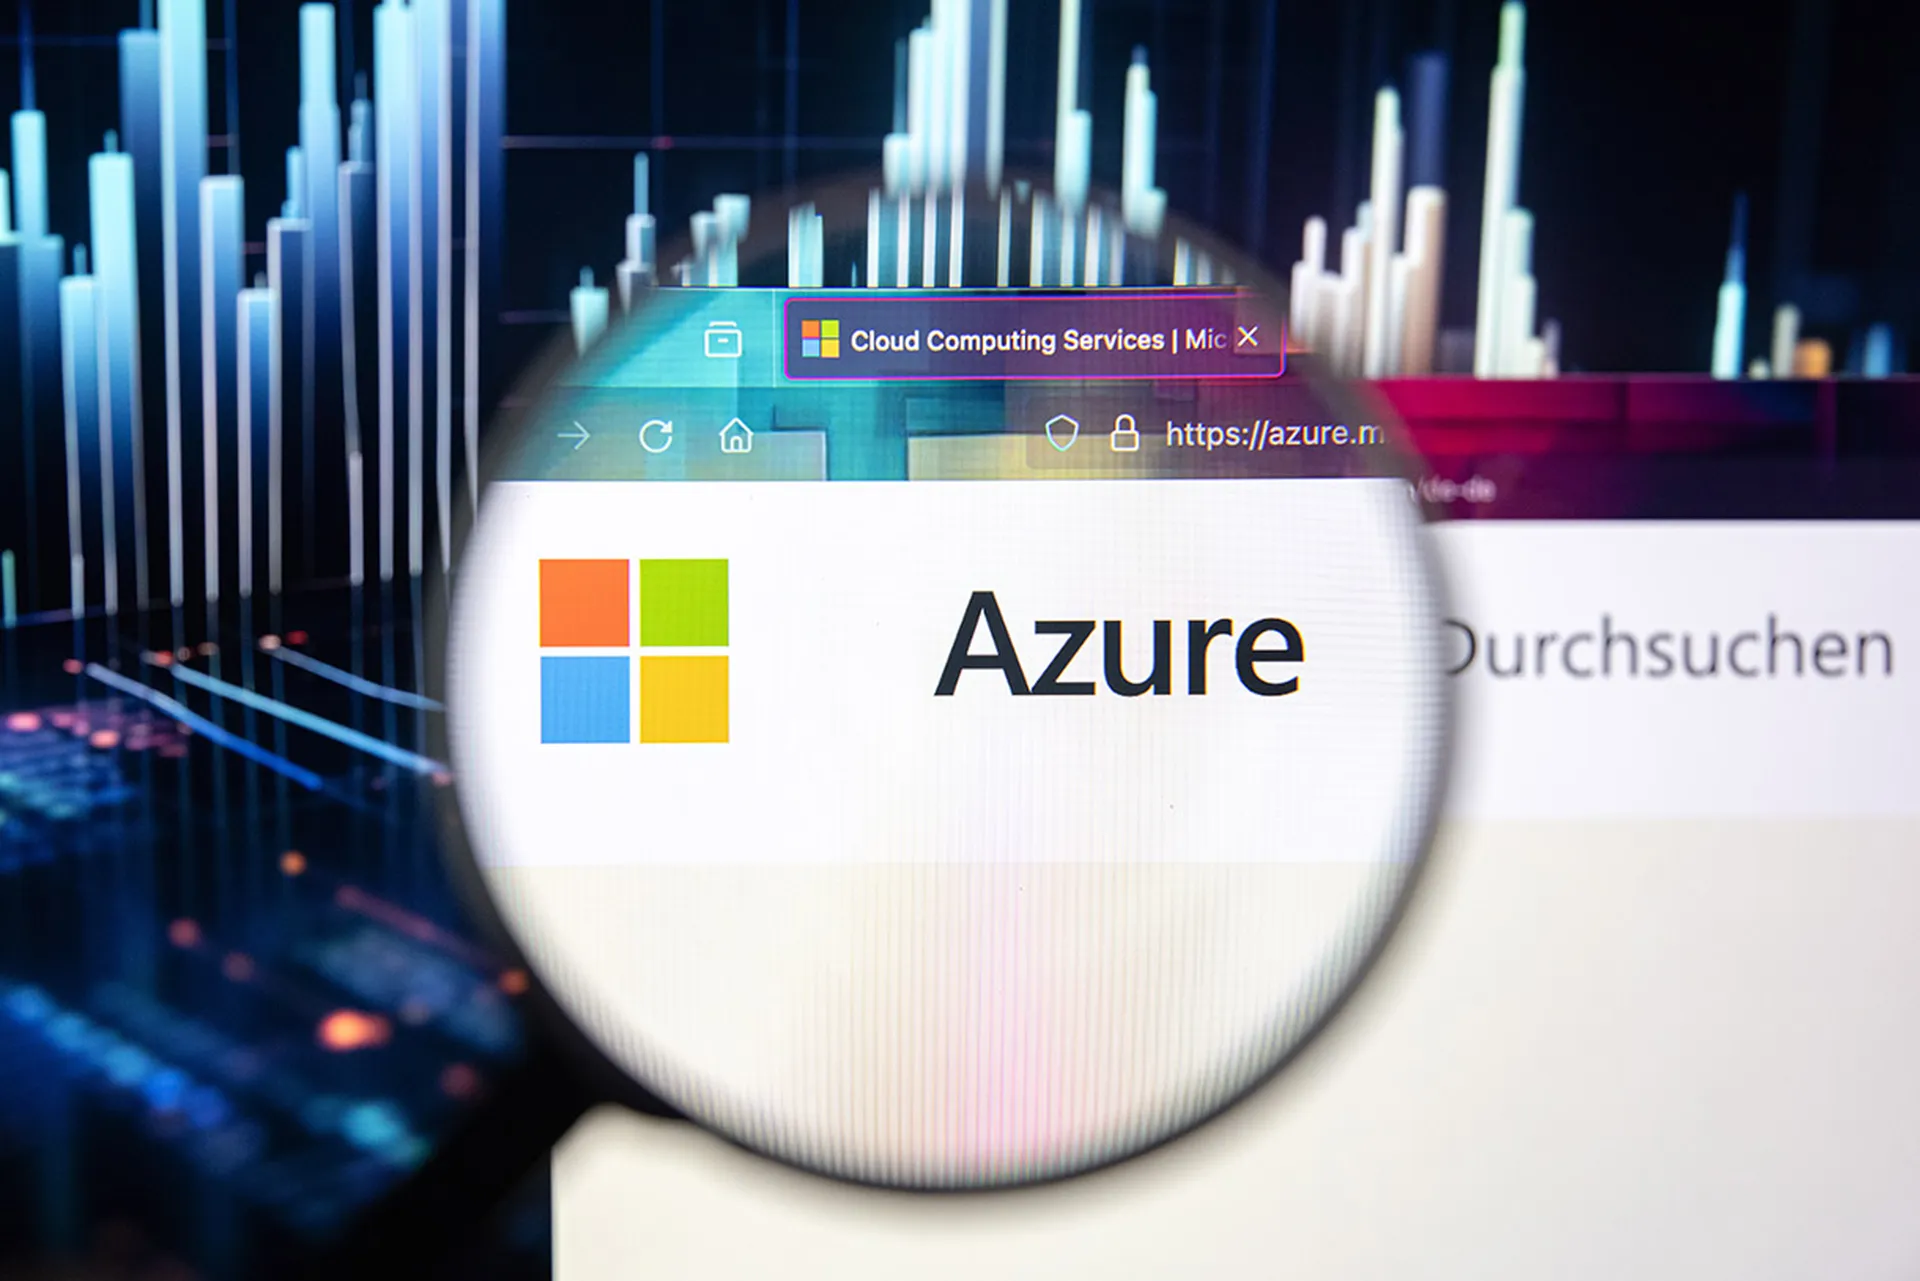 Microsoft Azure company logo on a website with blurry stock market developments in the background, seen on a computer screen through a magnifying glass.